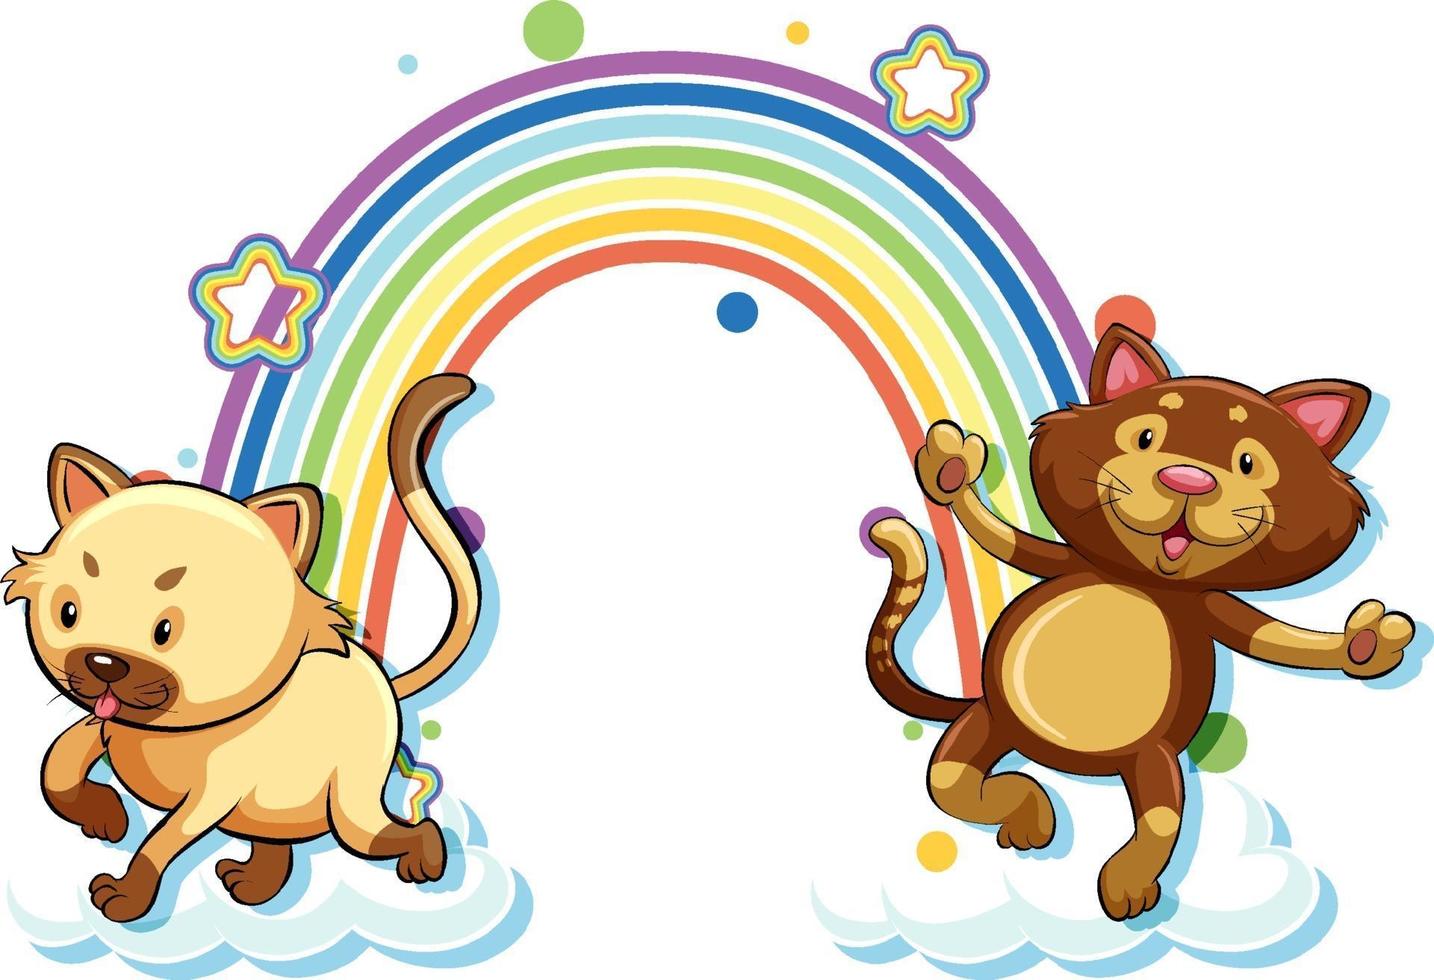 Two cats cartoon character with rainbow vector